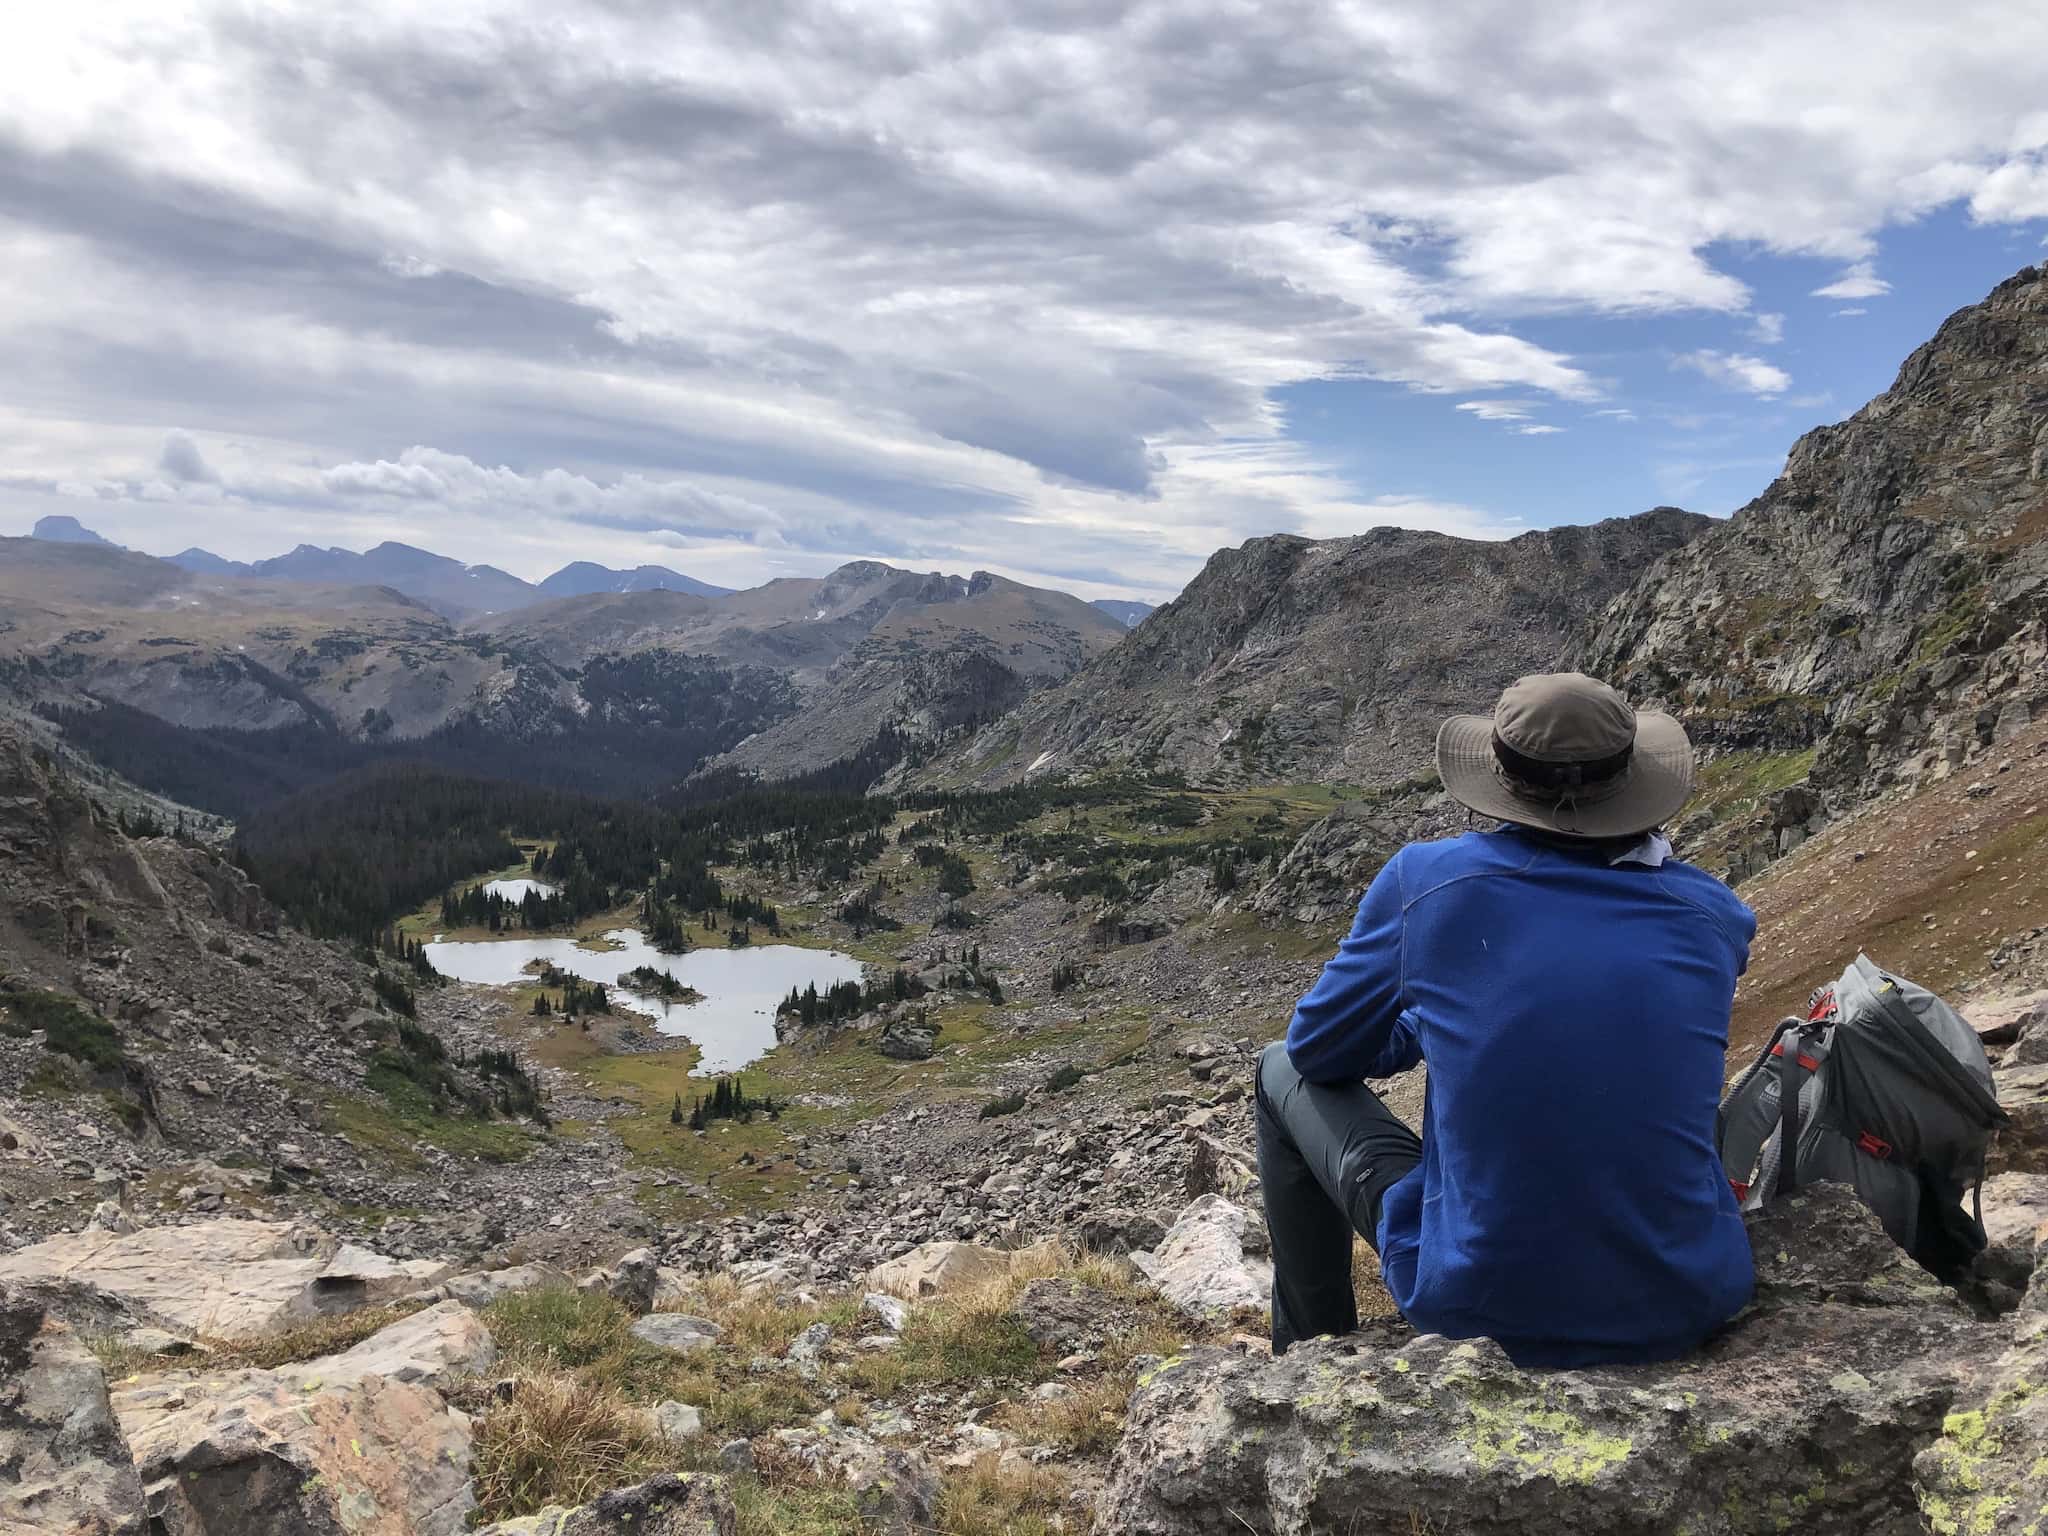 A man sitting on a rock, looking down at a valley.